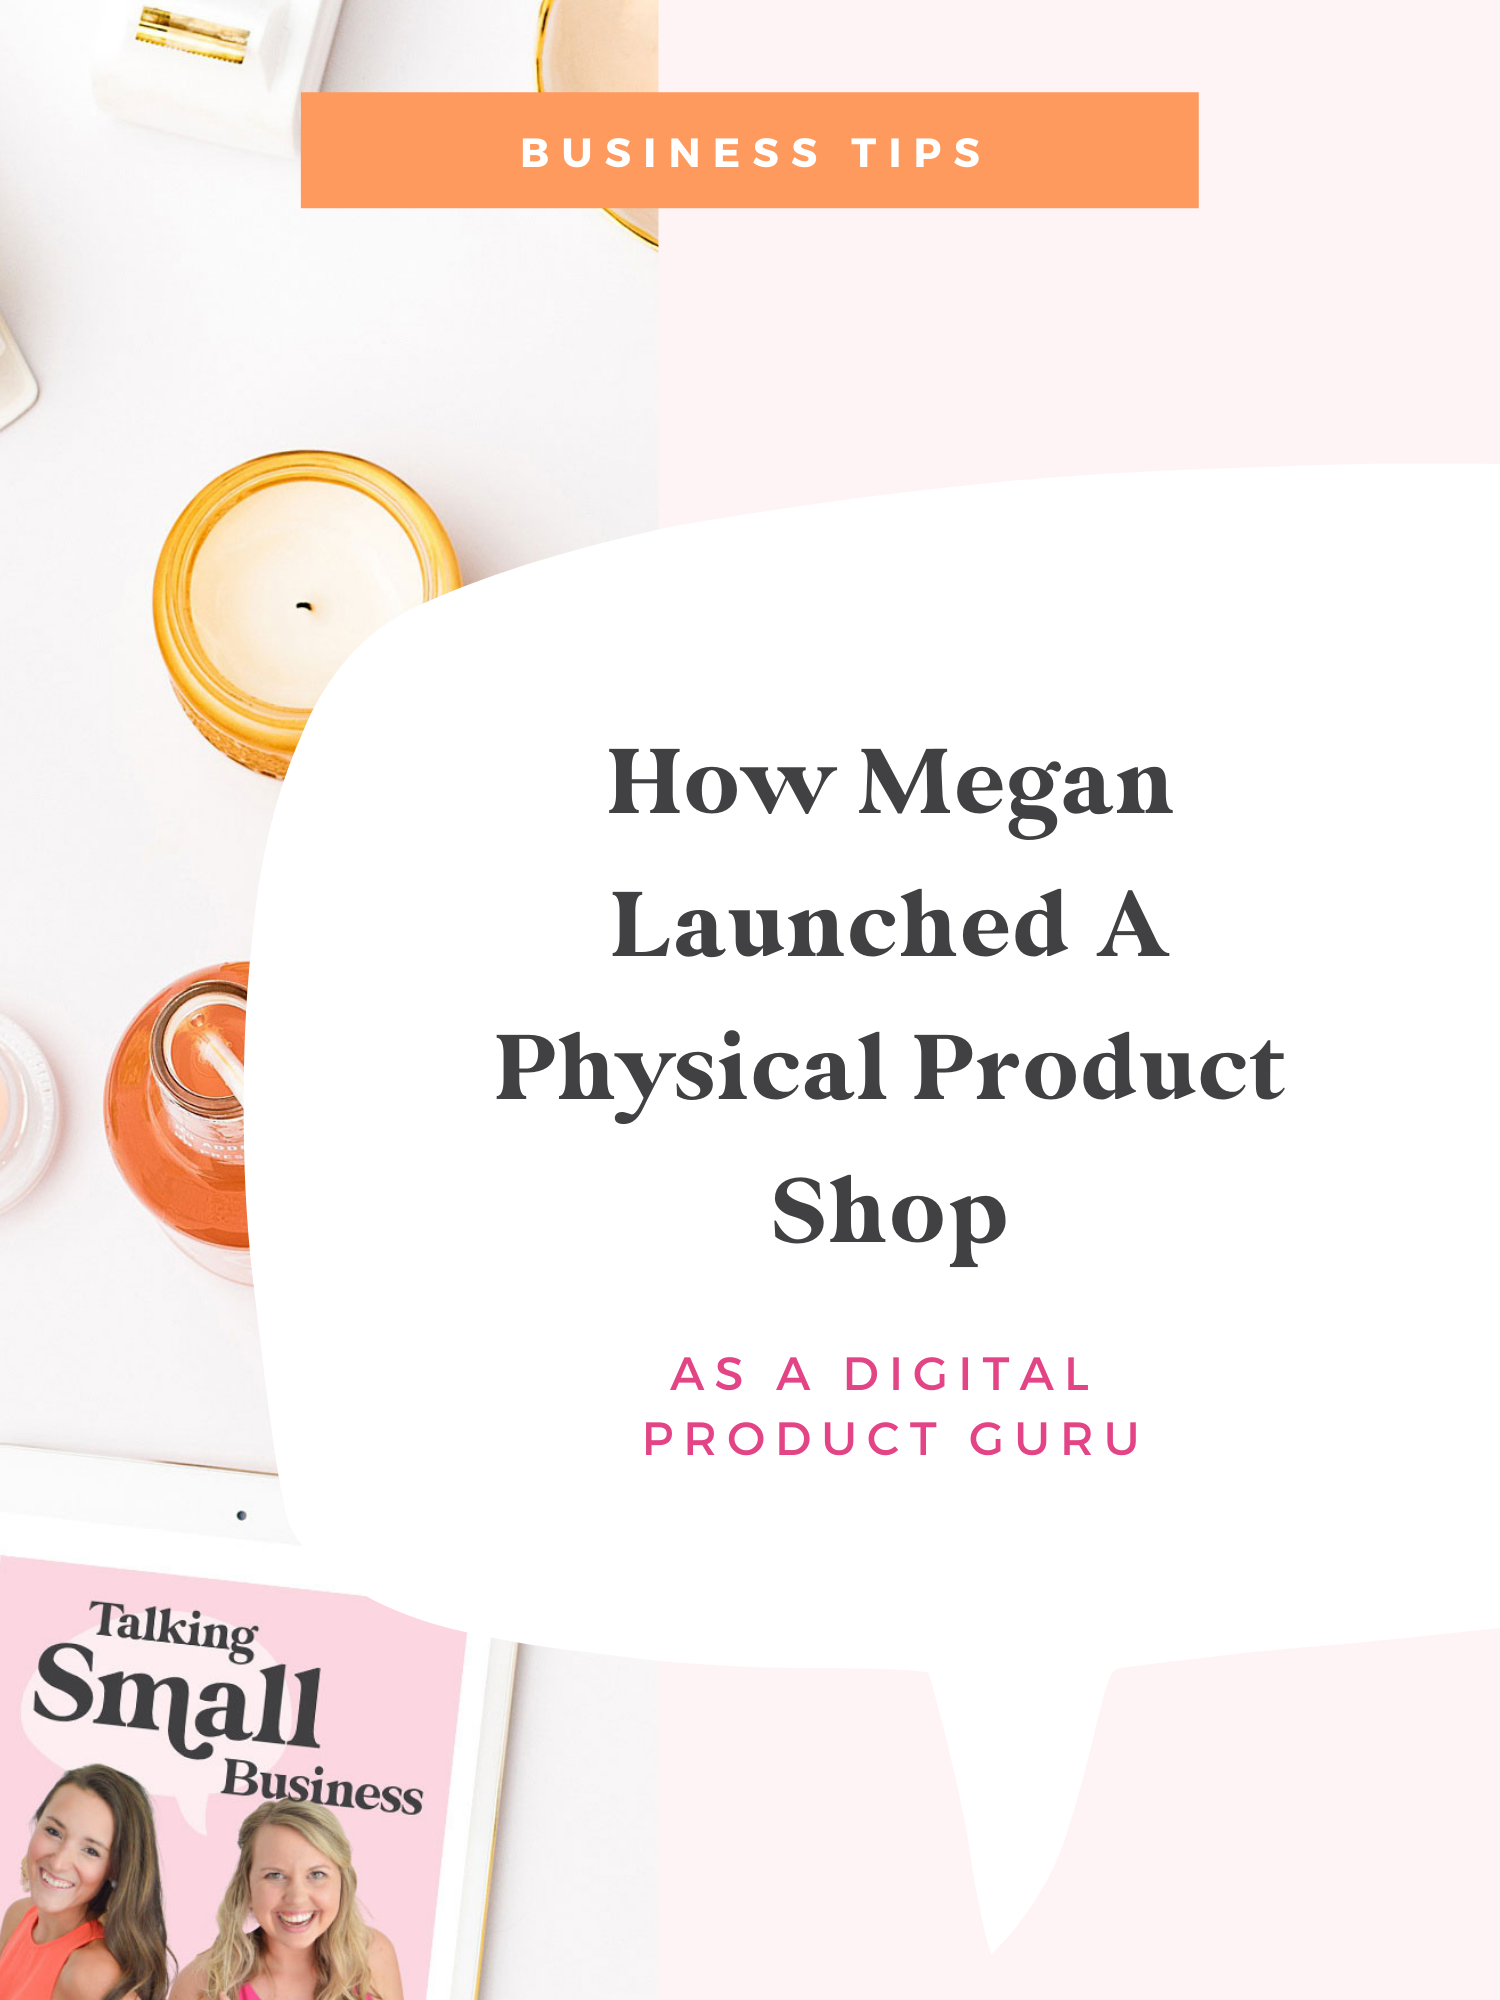 Launching a Physical Product Shop as a Small Business Owner: The story of how Megan Martin began a physical product shop and tips for you!